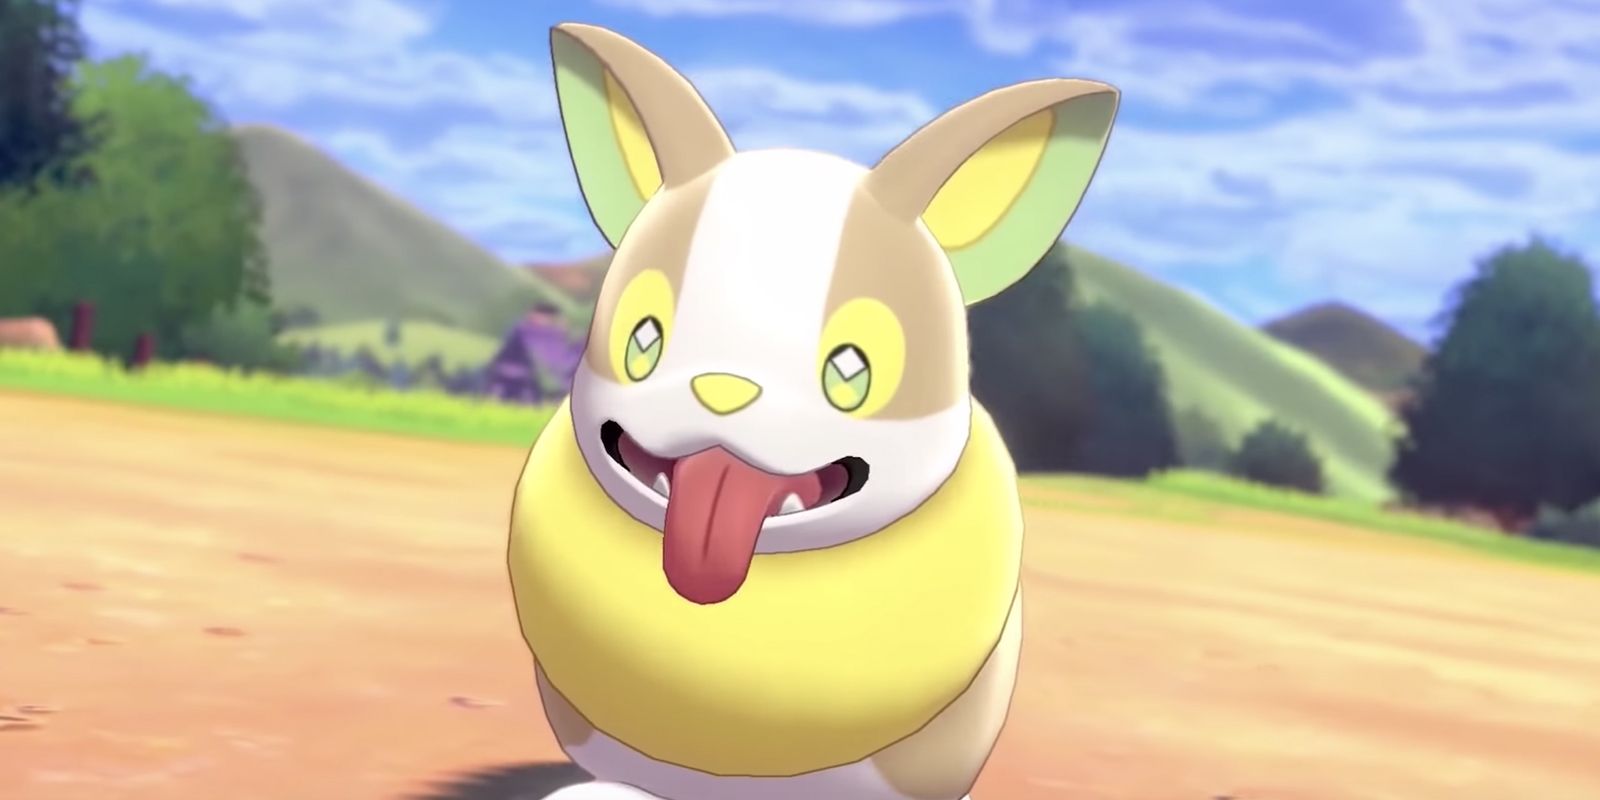 Yamper poses with its tongue out.